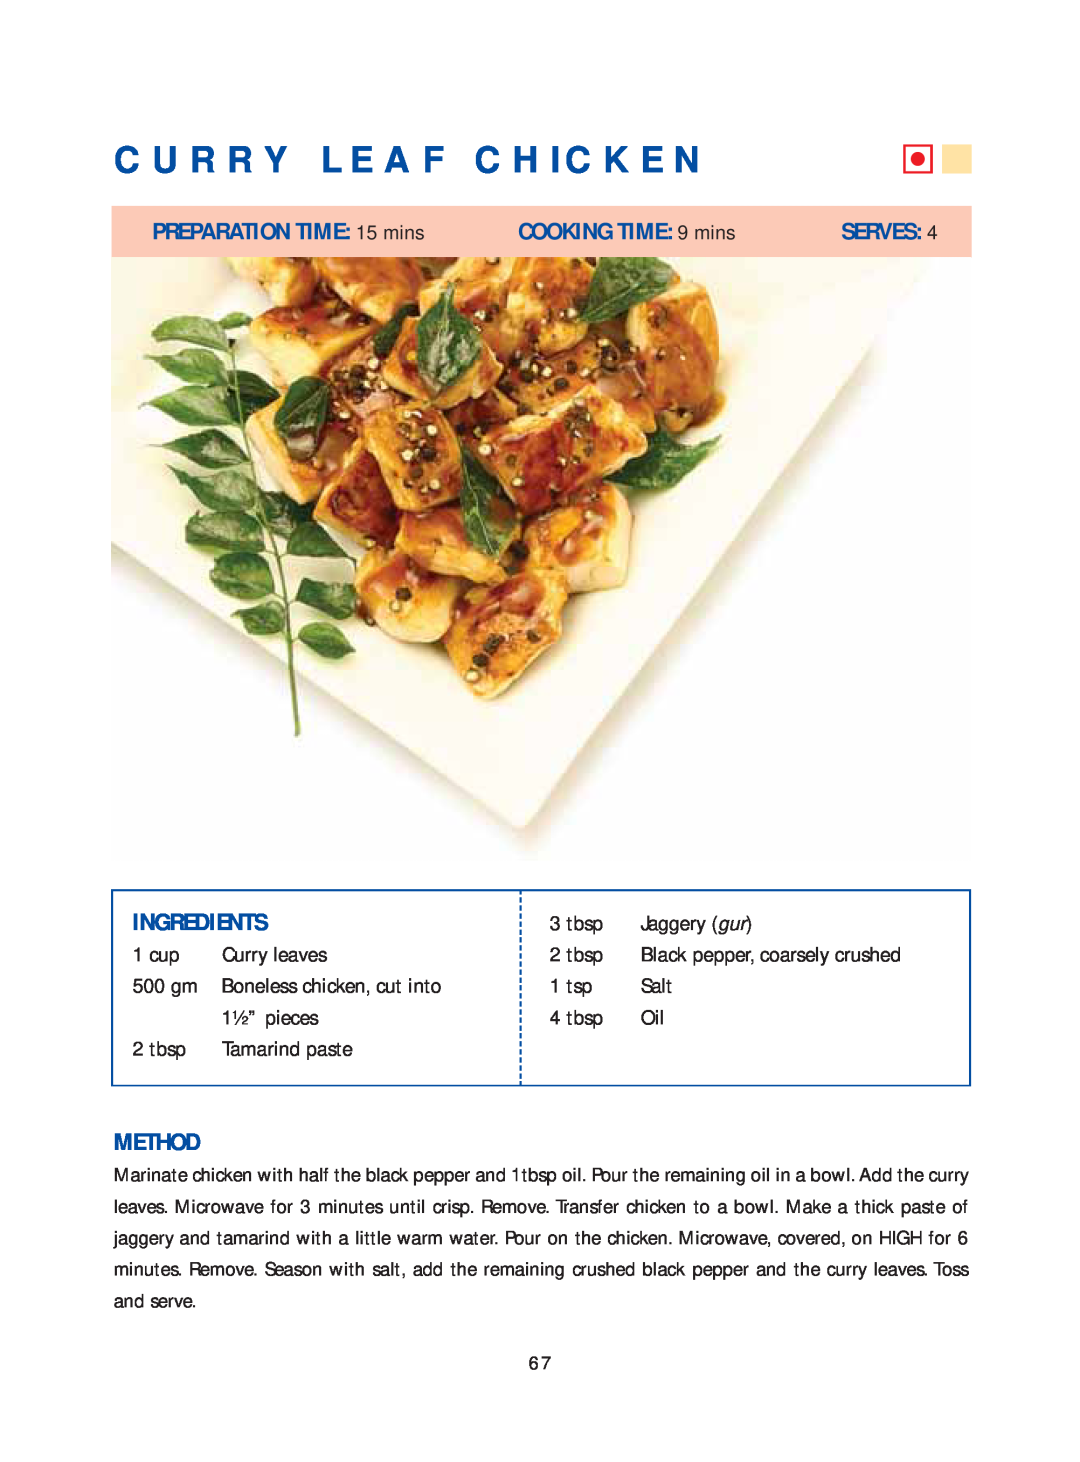 Samsung Microwave Oven Curry Leaf Chicken, PREPARATION TIME 15 mins, COOKING TIME: 9 mins, Serves, Ingredients, Method 